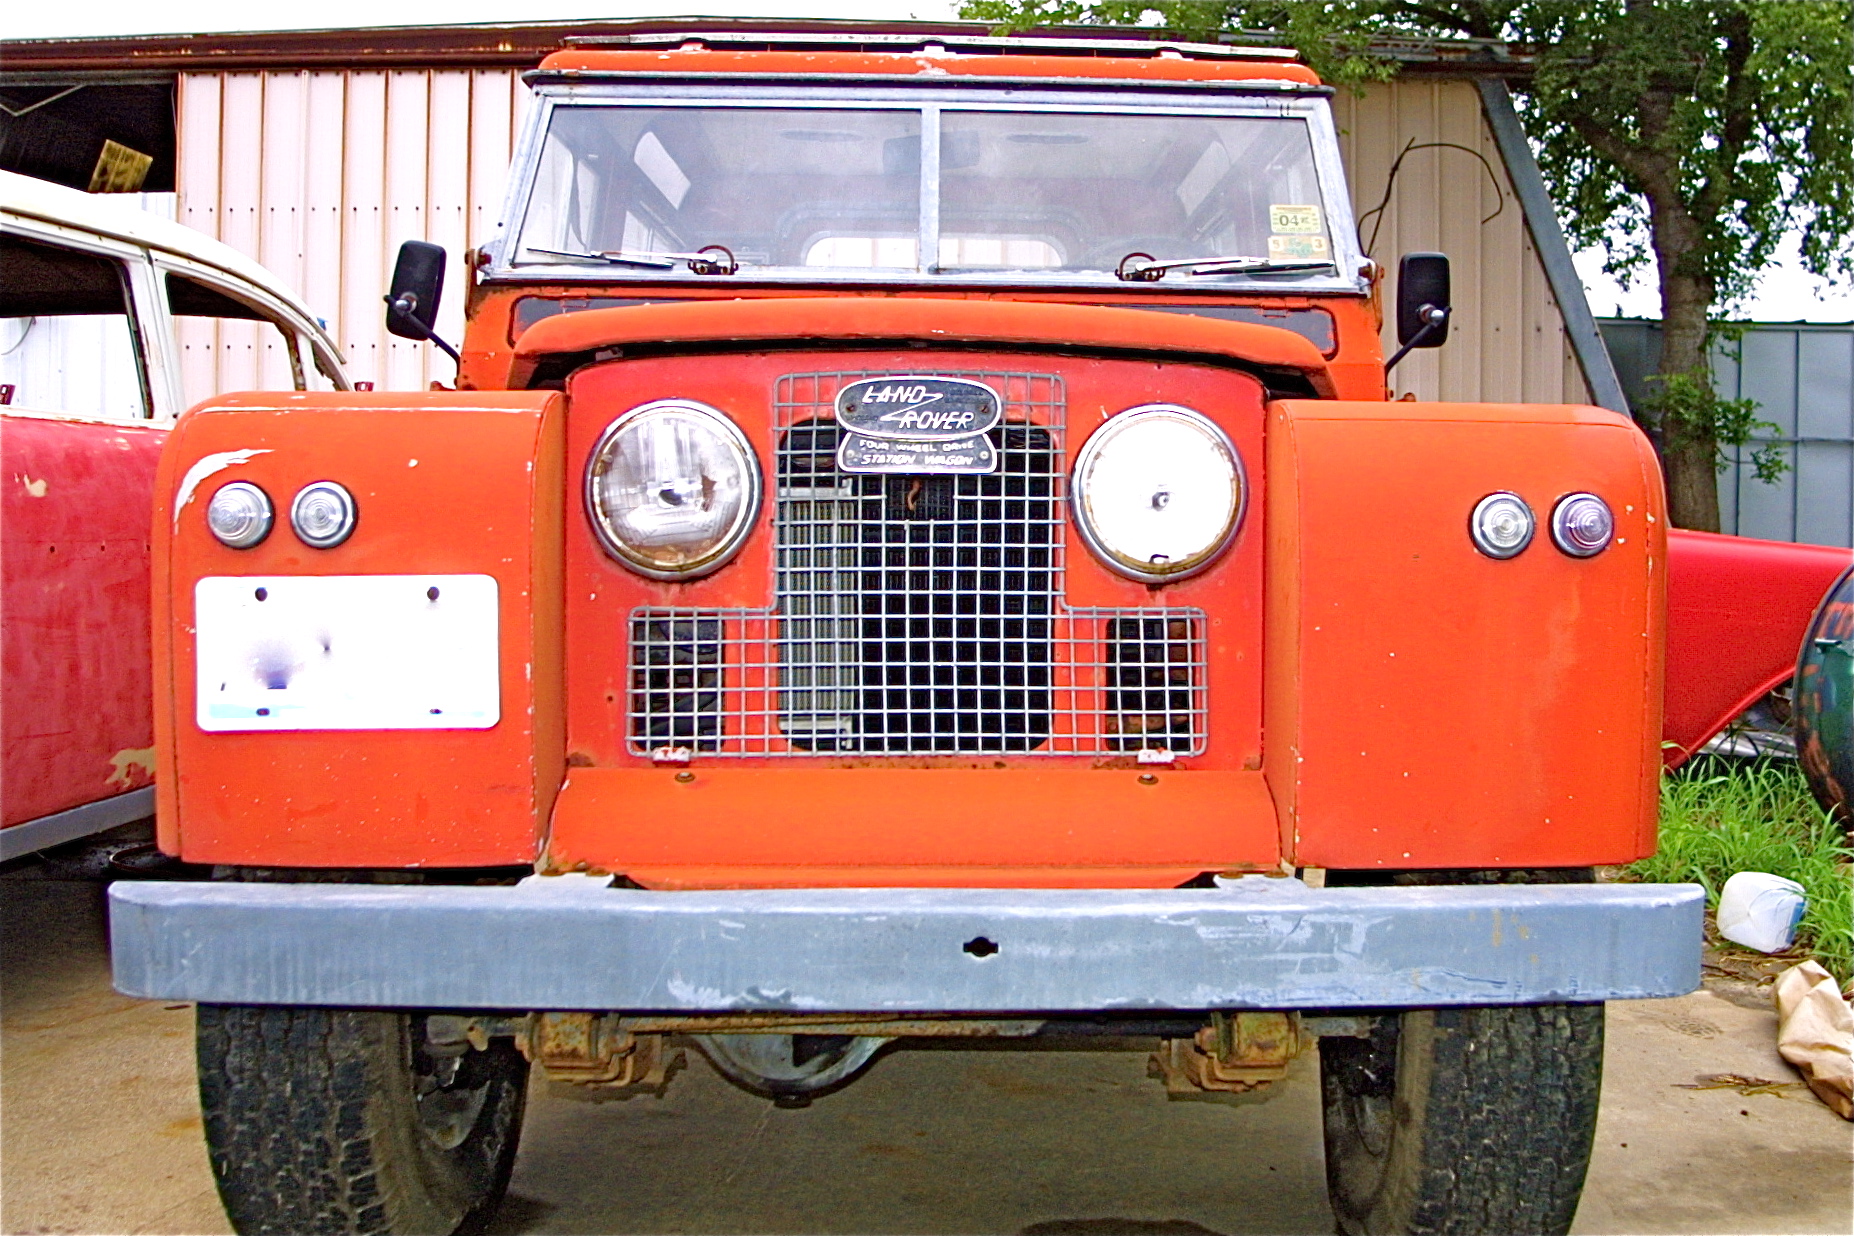 Red Land Rover front view